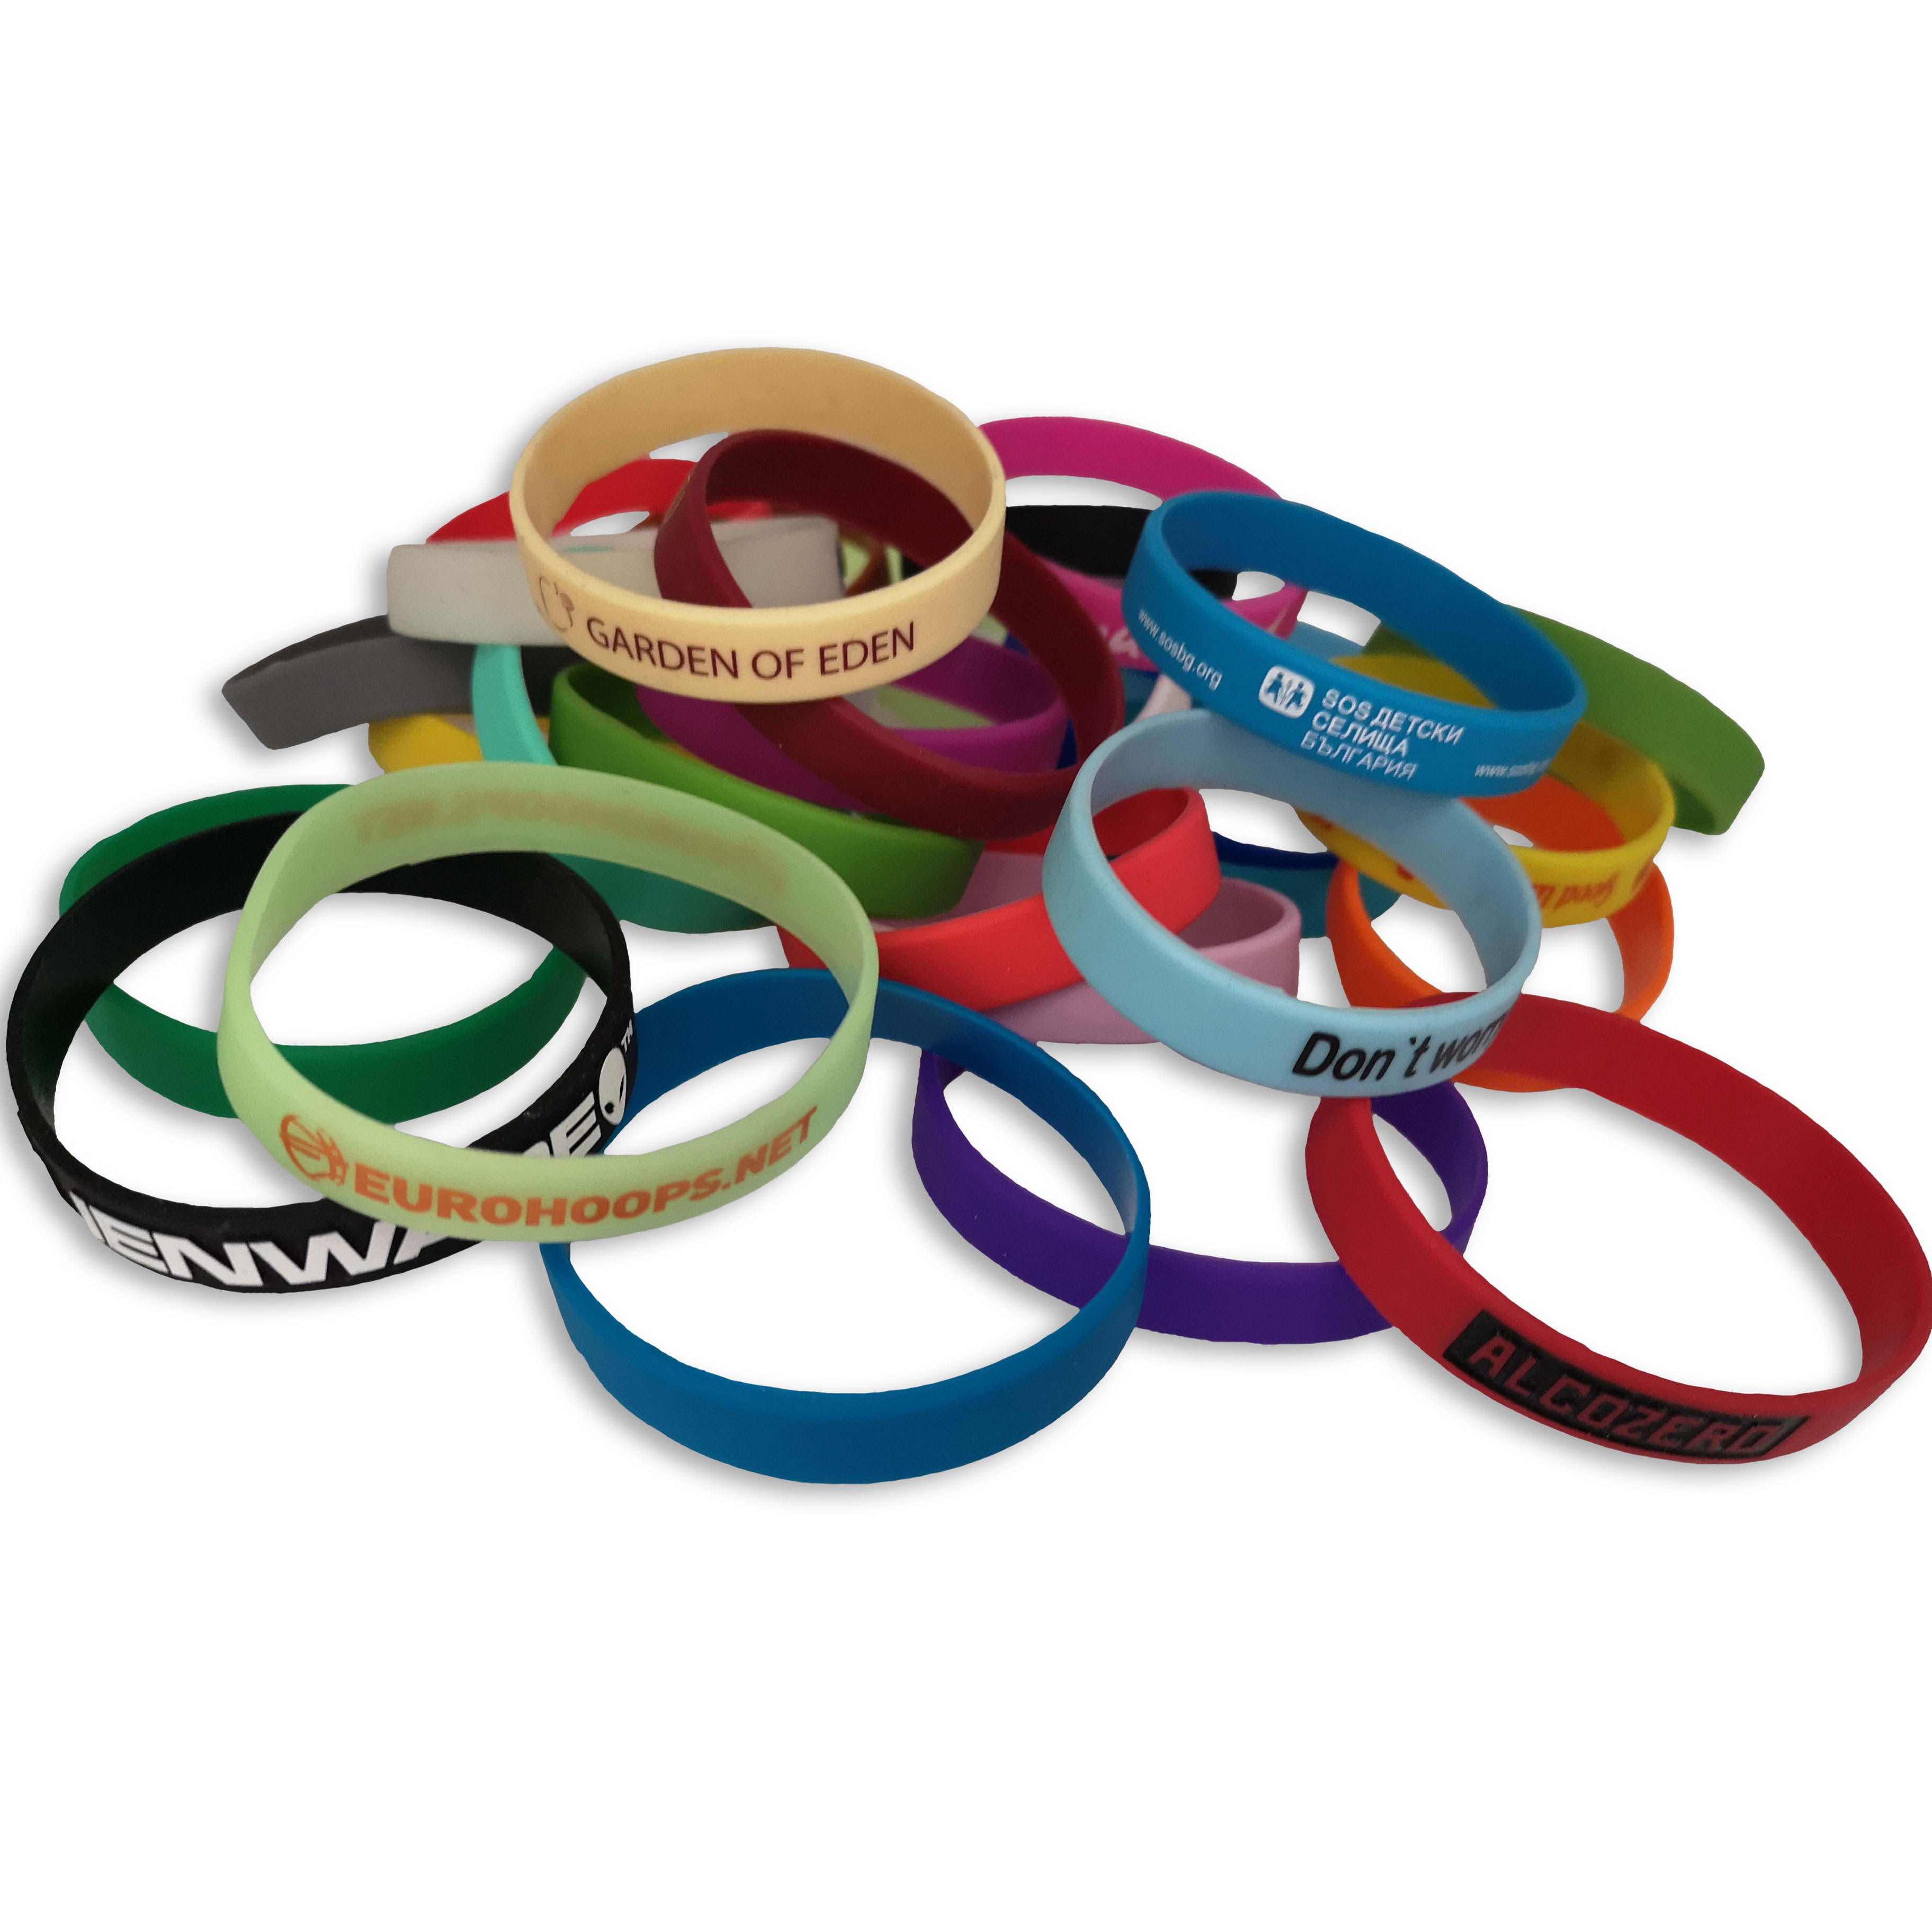  , custom personalized silicone bracelets, embossed or debossed wristbands